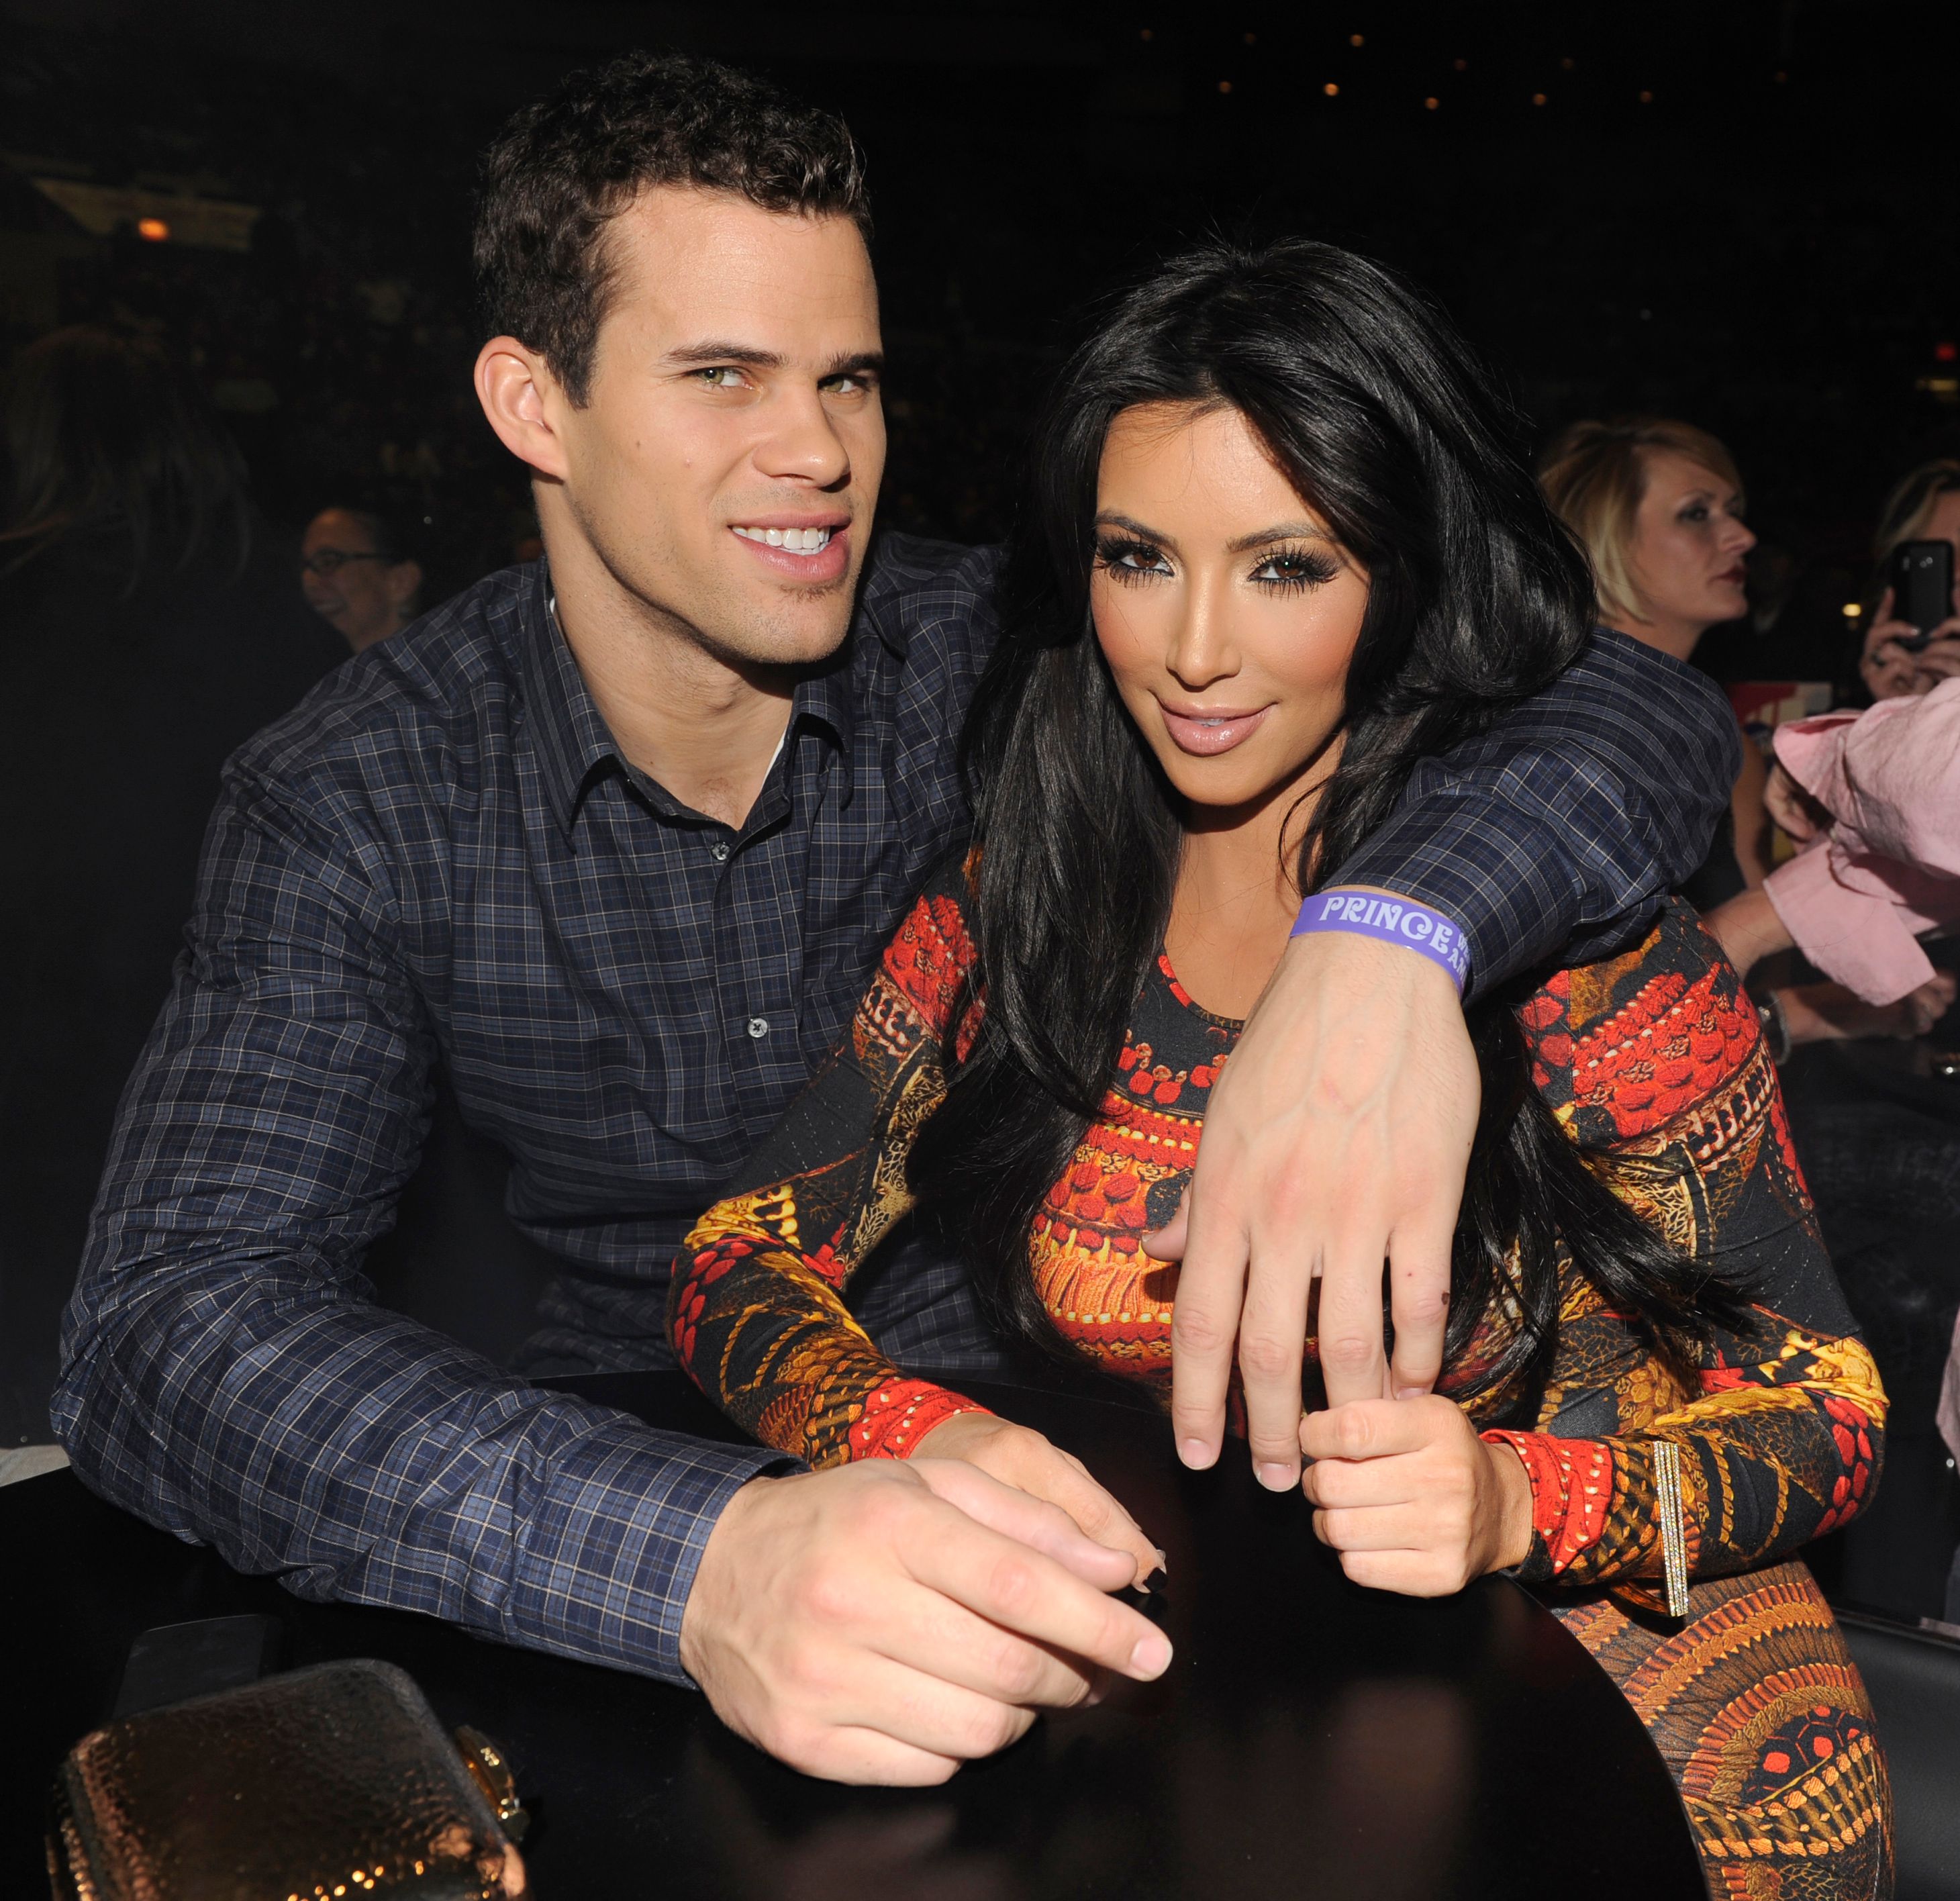  Kris Humphries and Kim Kardashian at Prince's "Welcome 2 America" performance in 2011 in New York City | Source: Getty Images